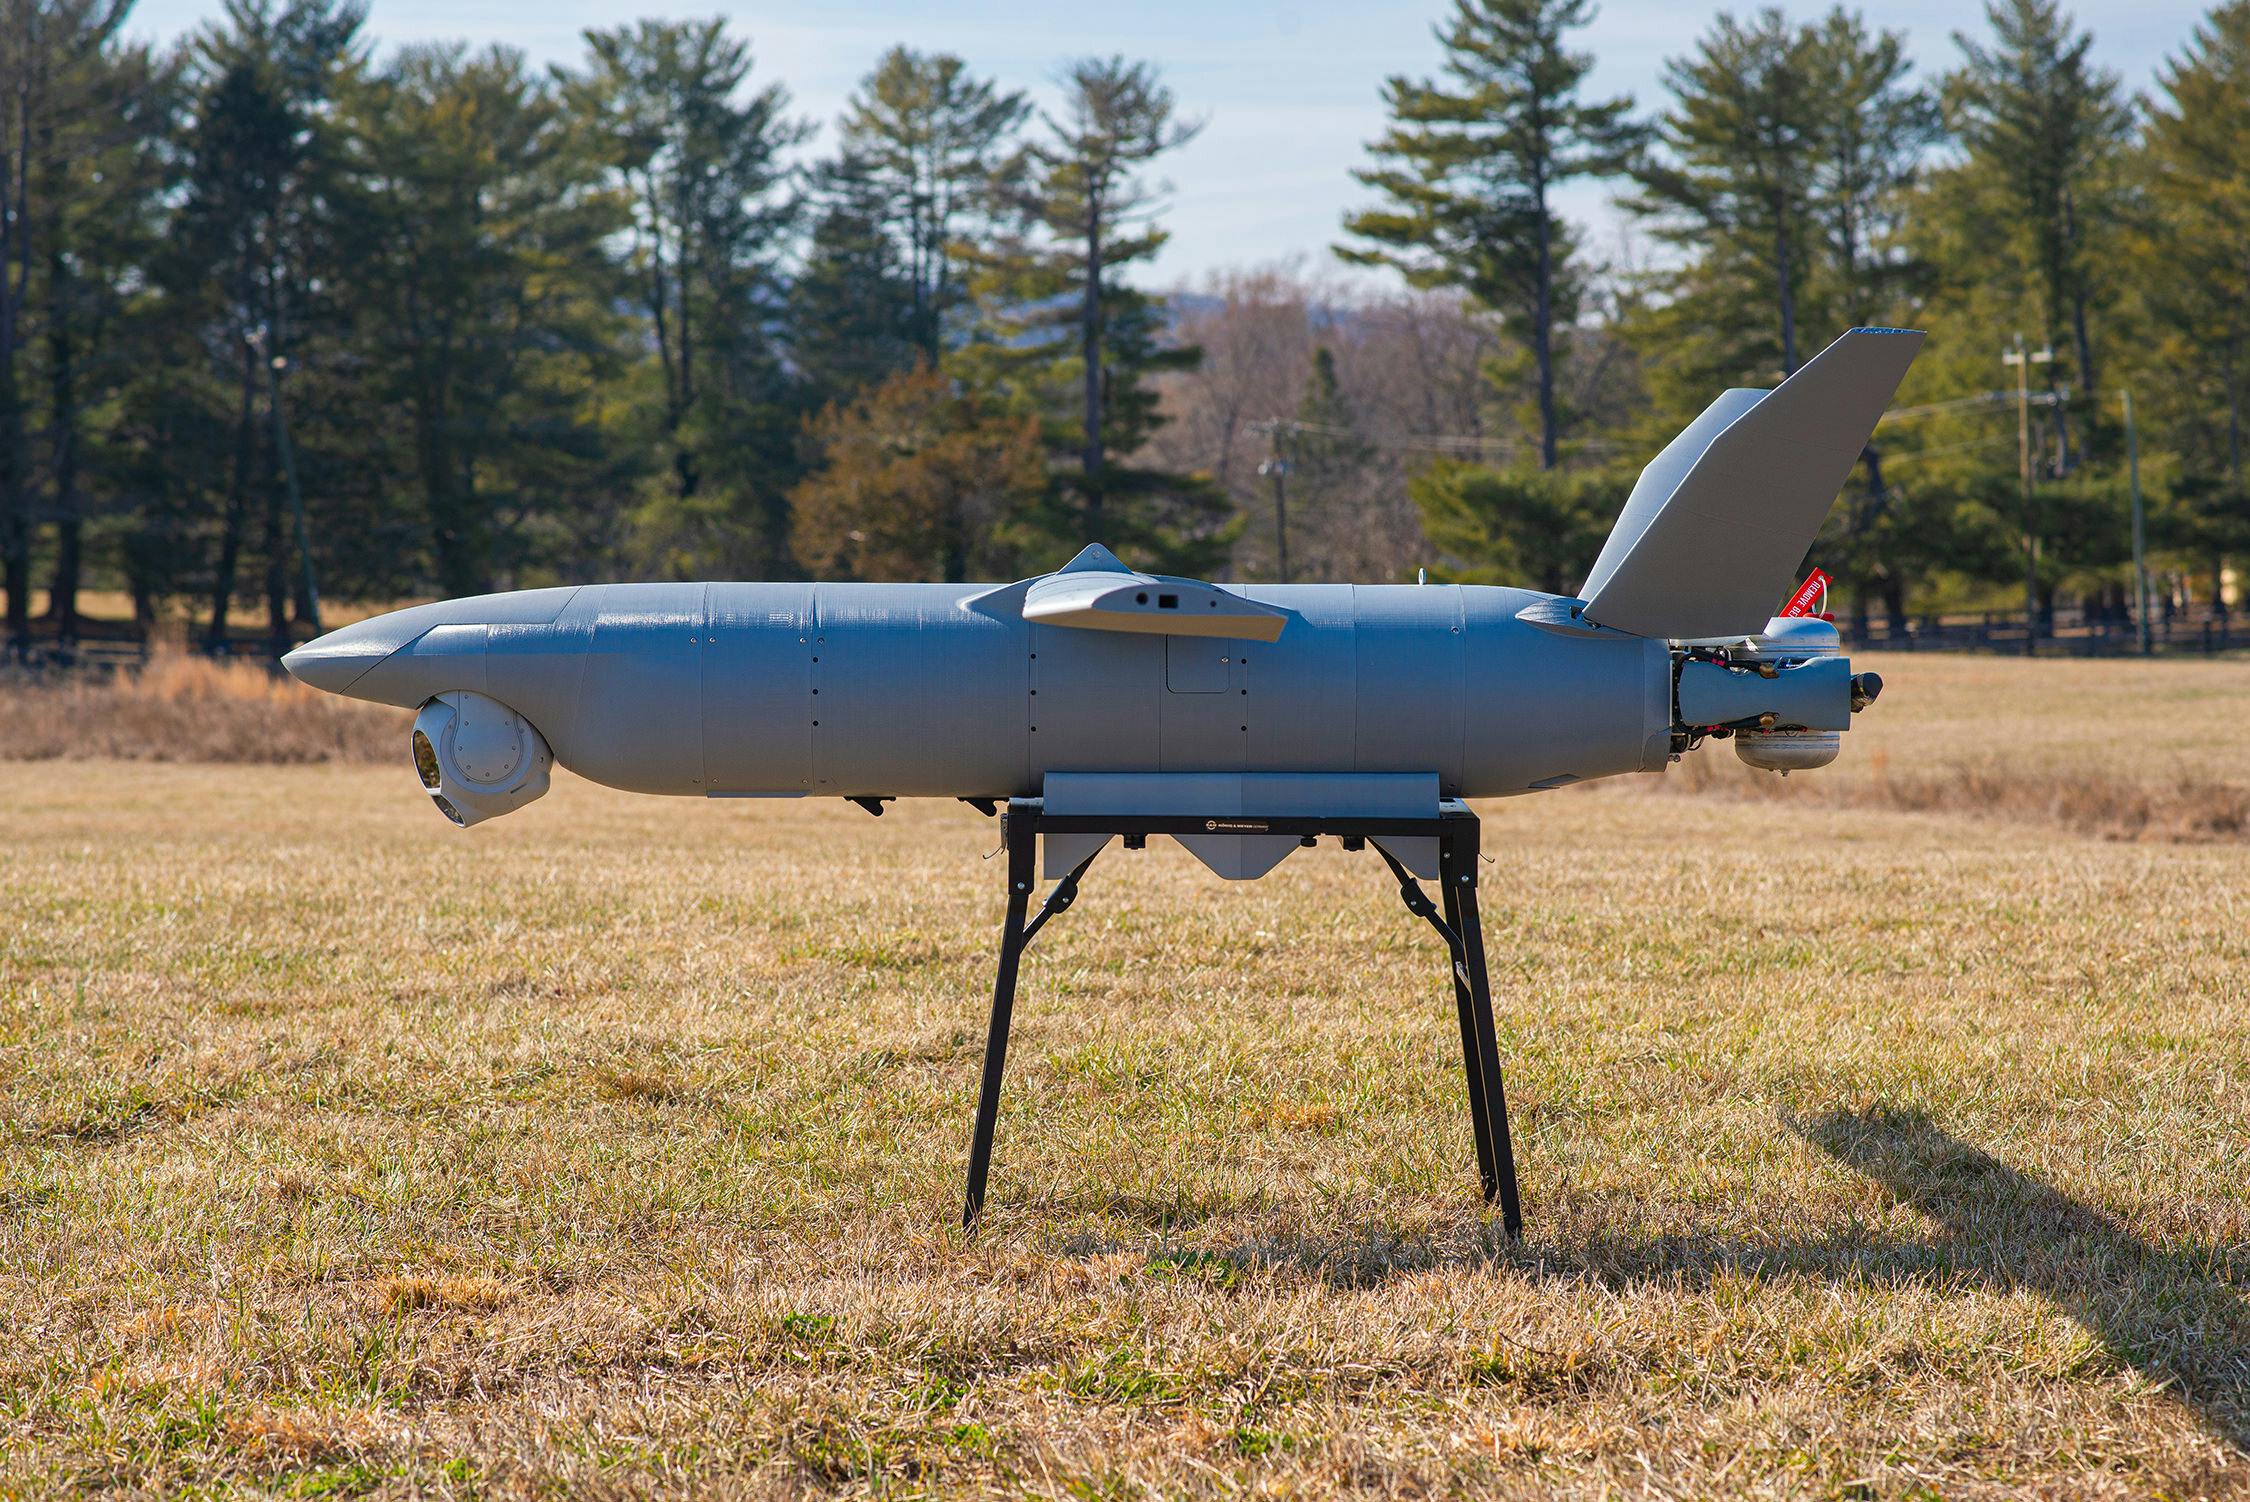 The RapidFlight M2 UAS on a stand